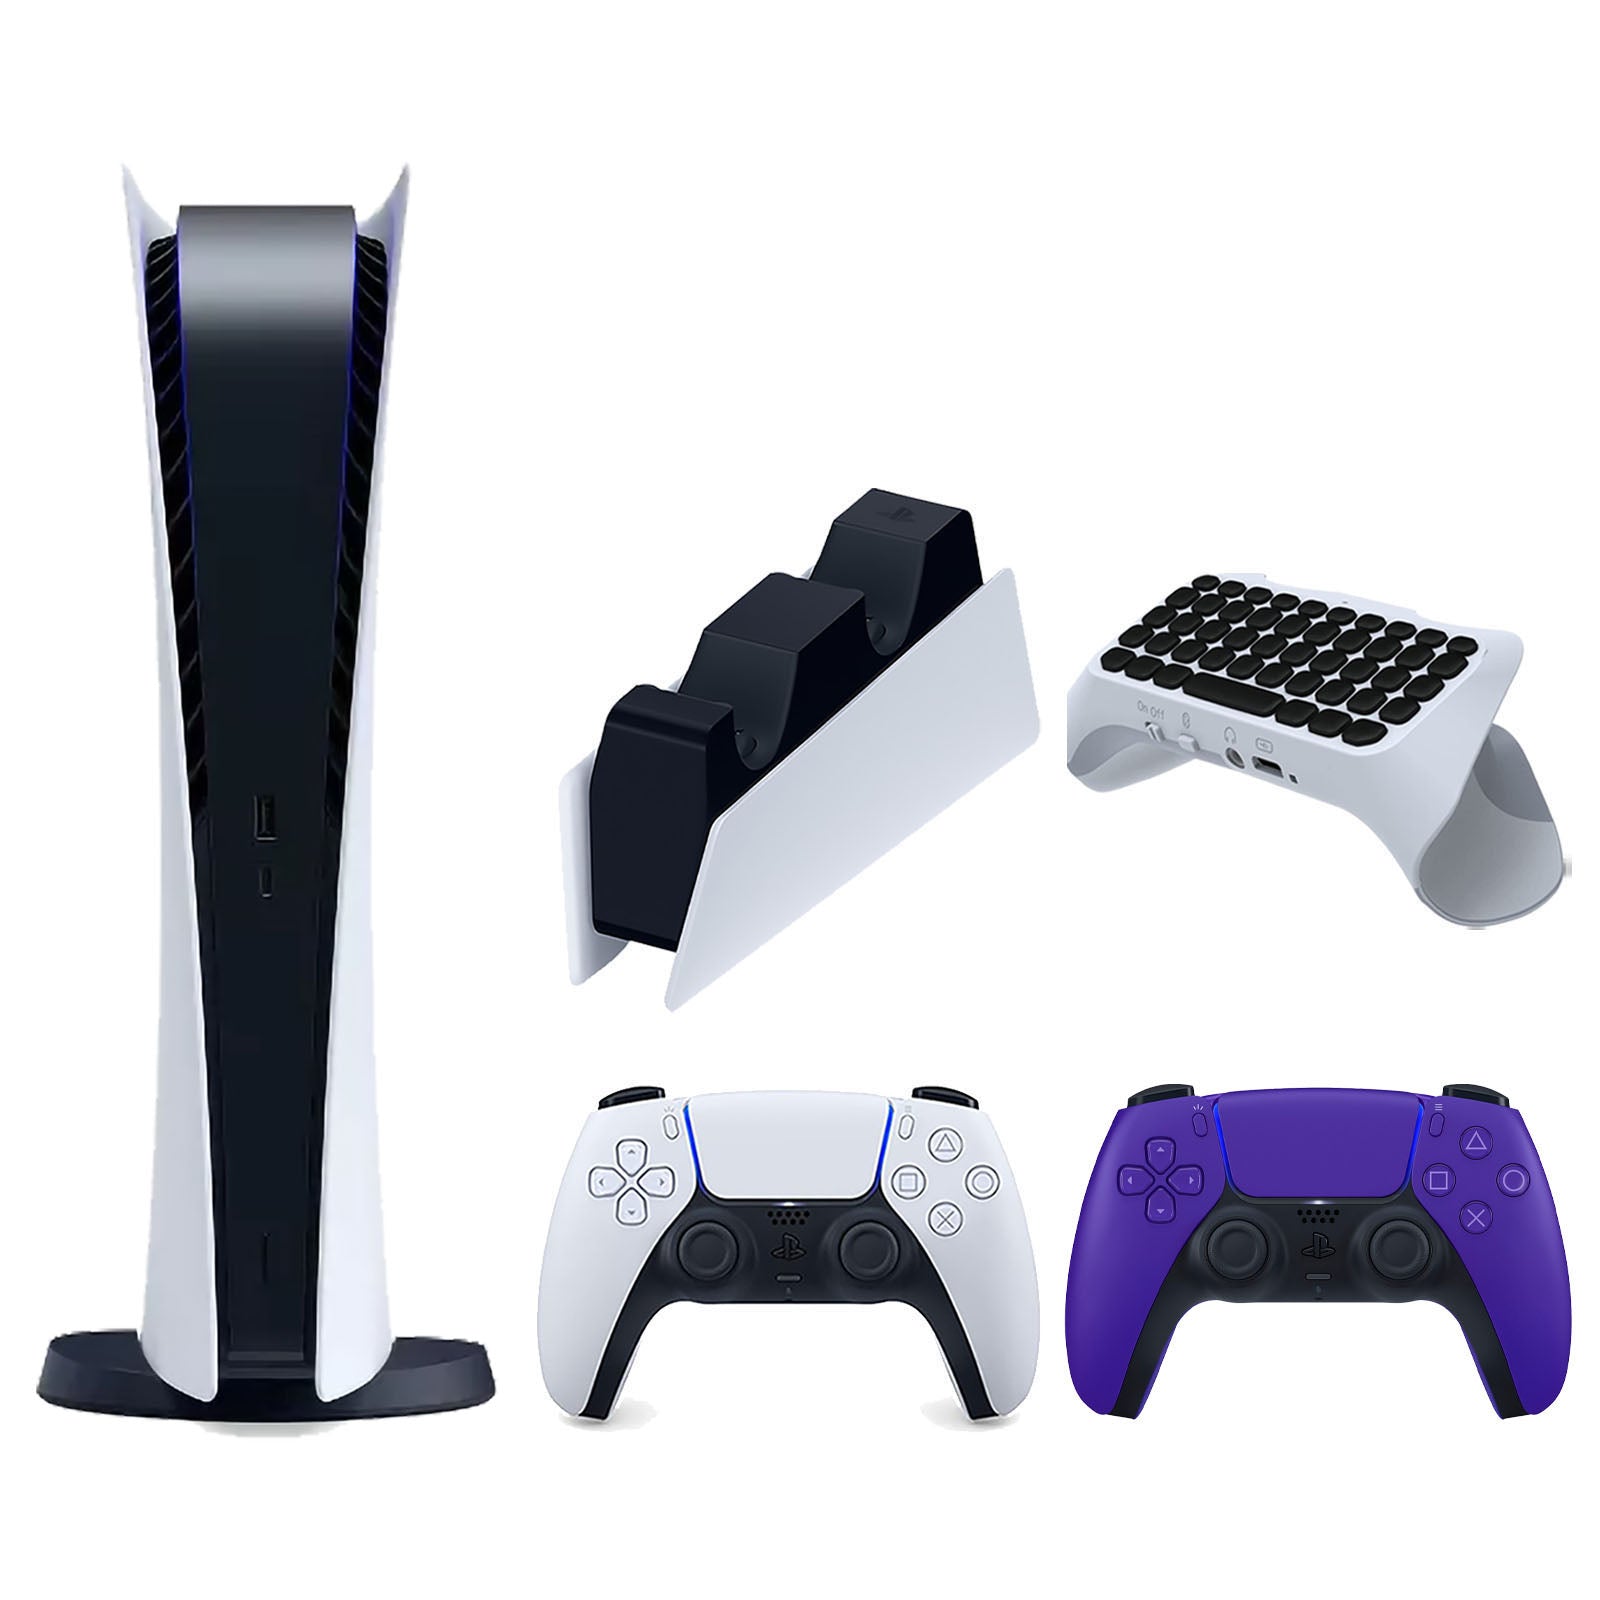 Sony Playstation 5 Digital Edition Console with Extra Purple Controller, DualSense Charging Station and Surge QuickType 2.0 Wireless PS5 Controller Keypad Bundle - Pro-Distributing